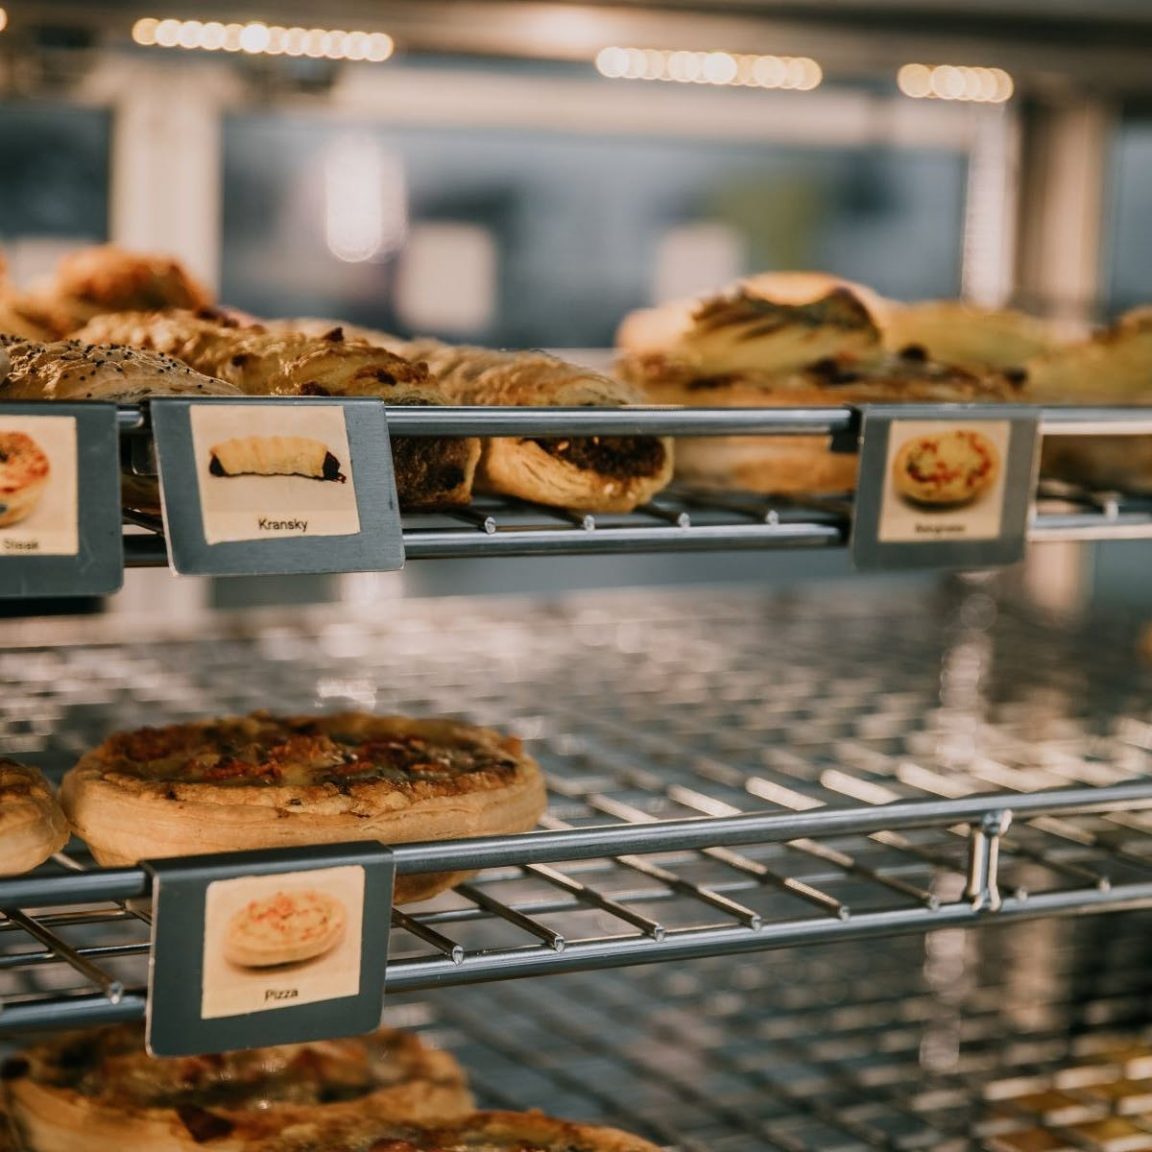 Selection of pies and pastries